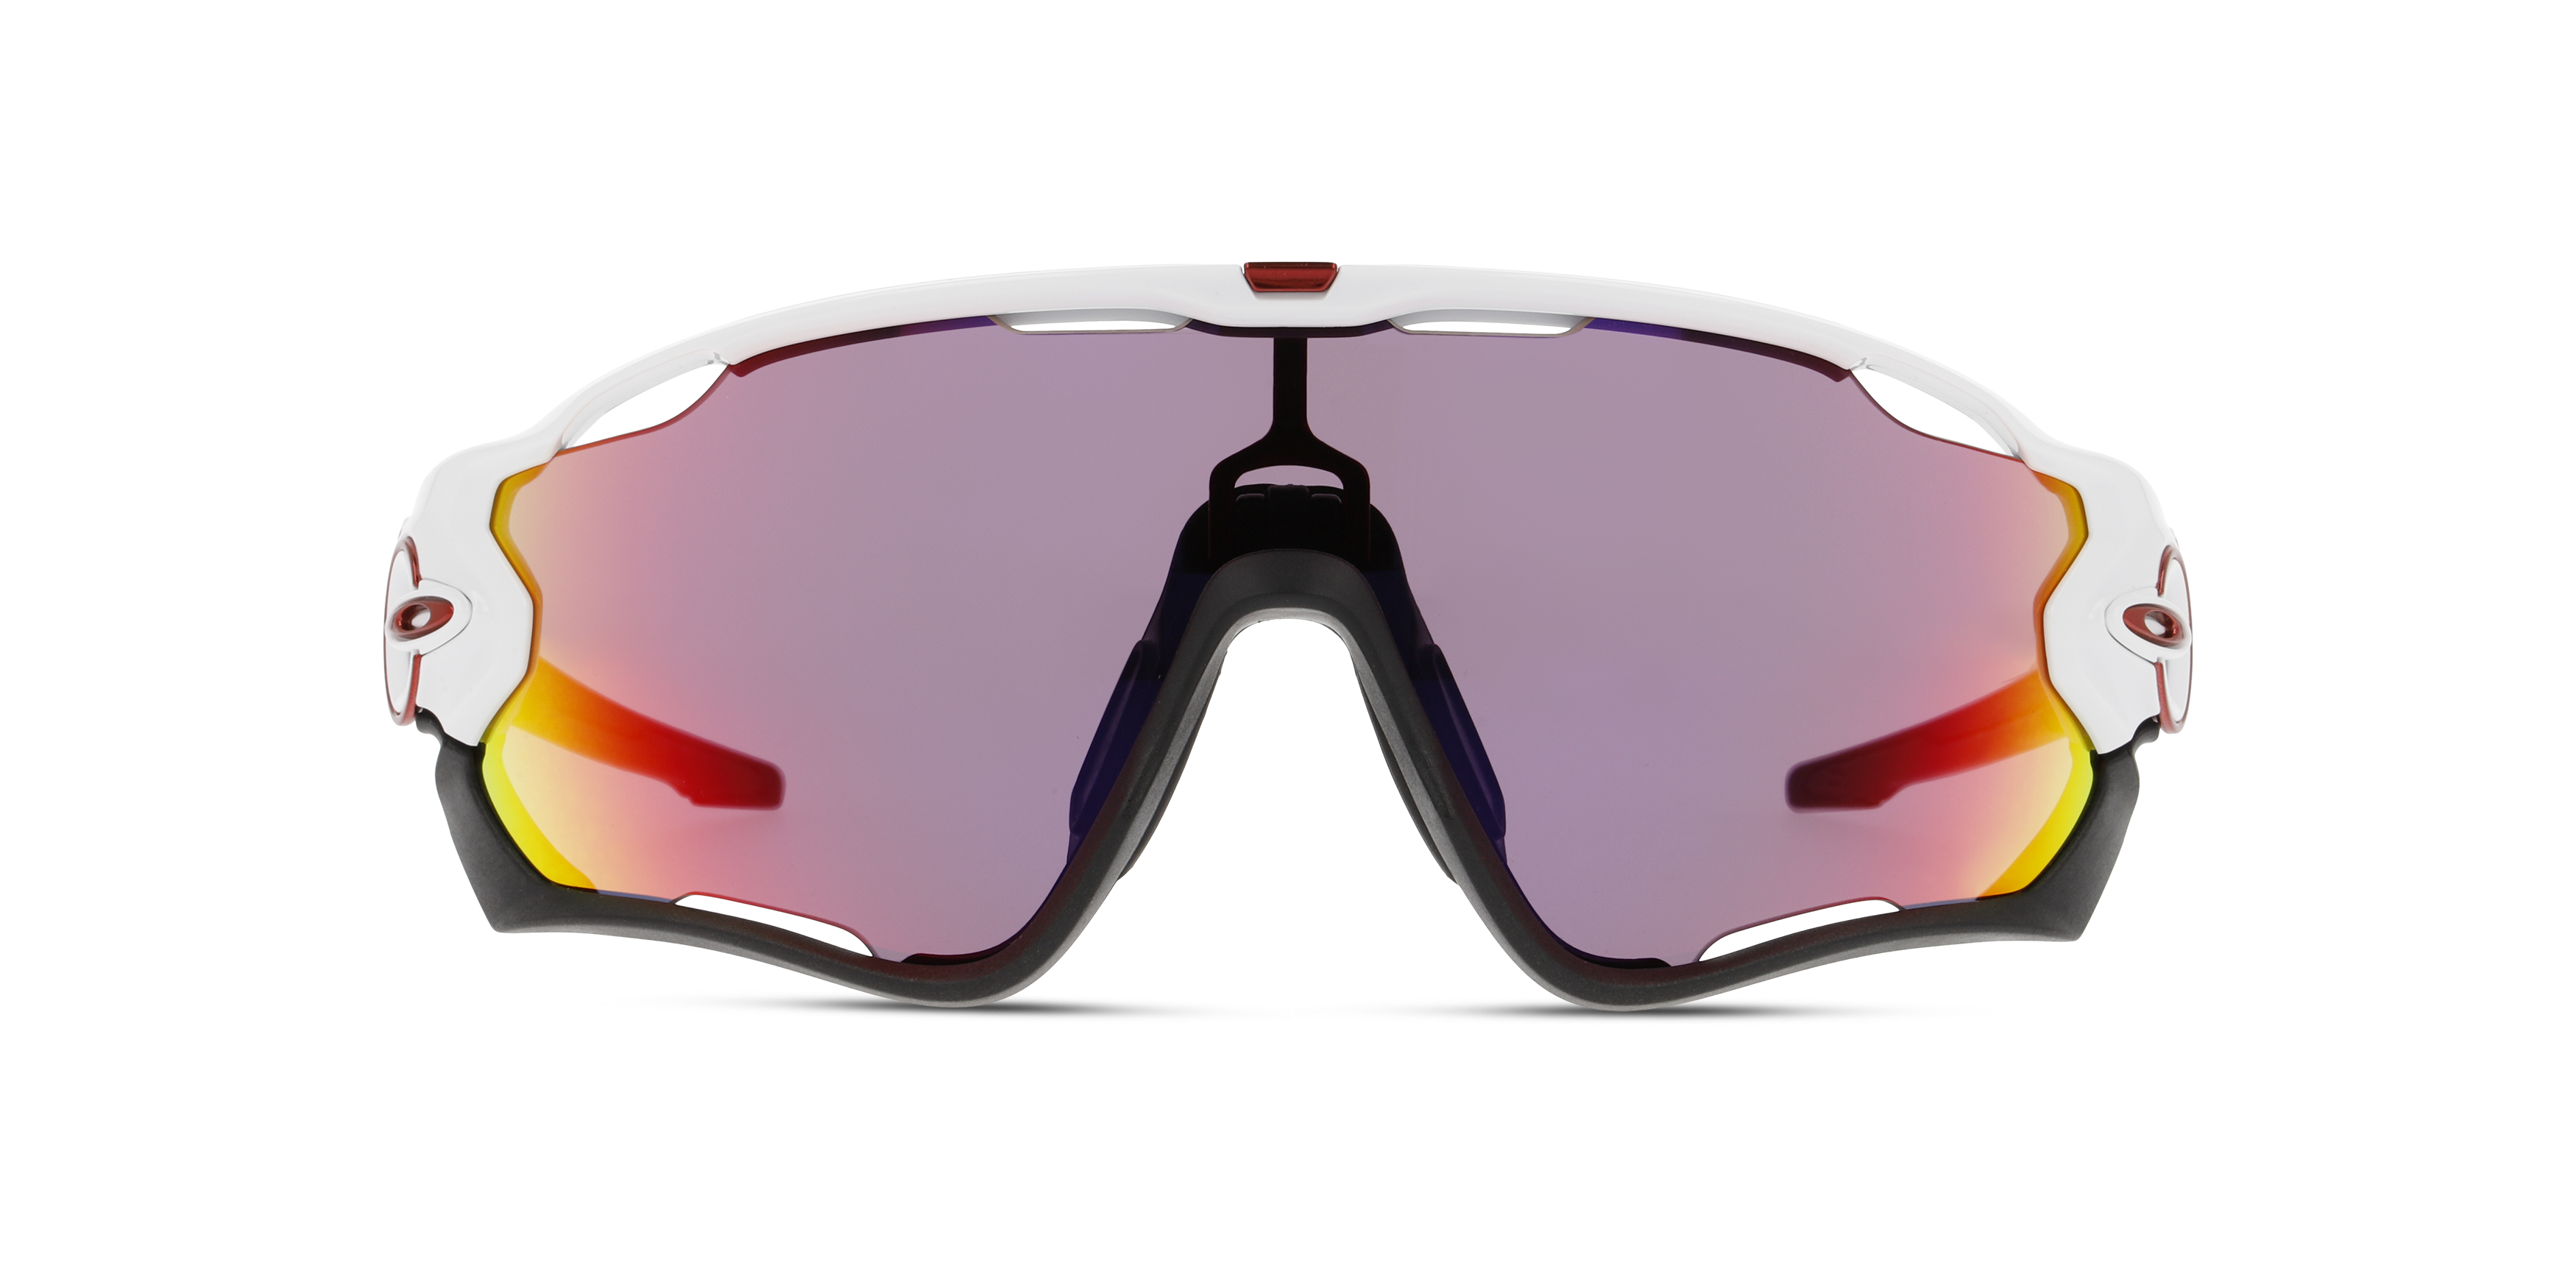 [products.image.front] Oakley 0OO9290 929005